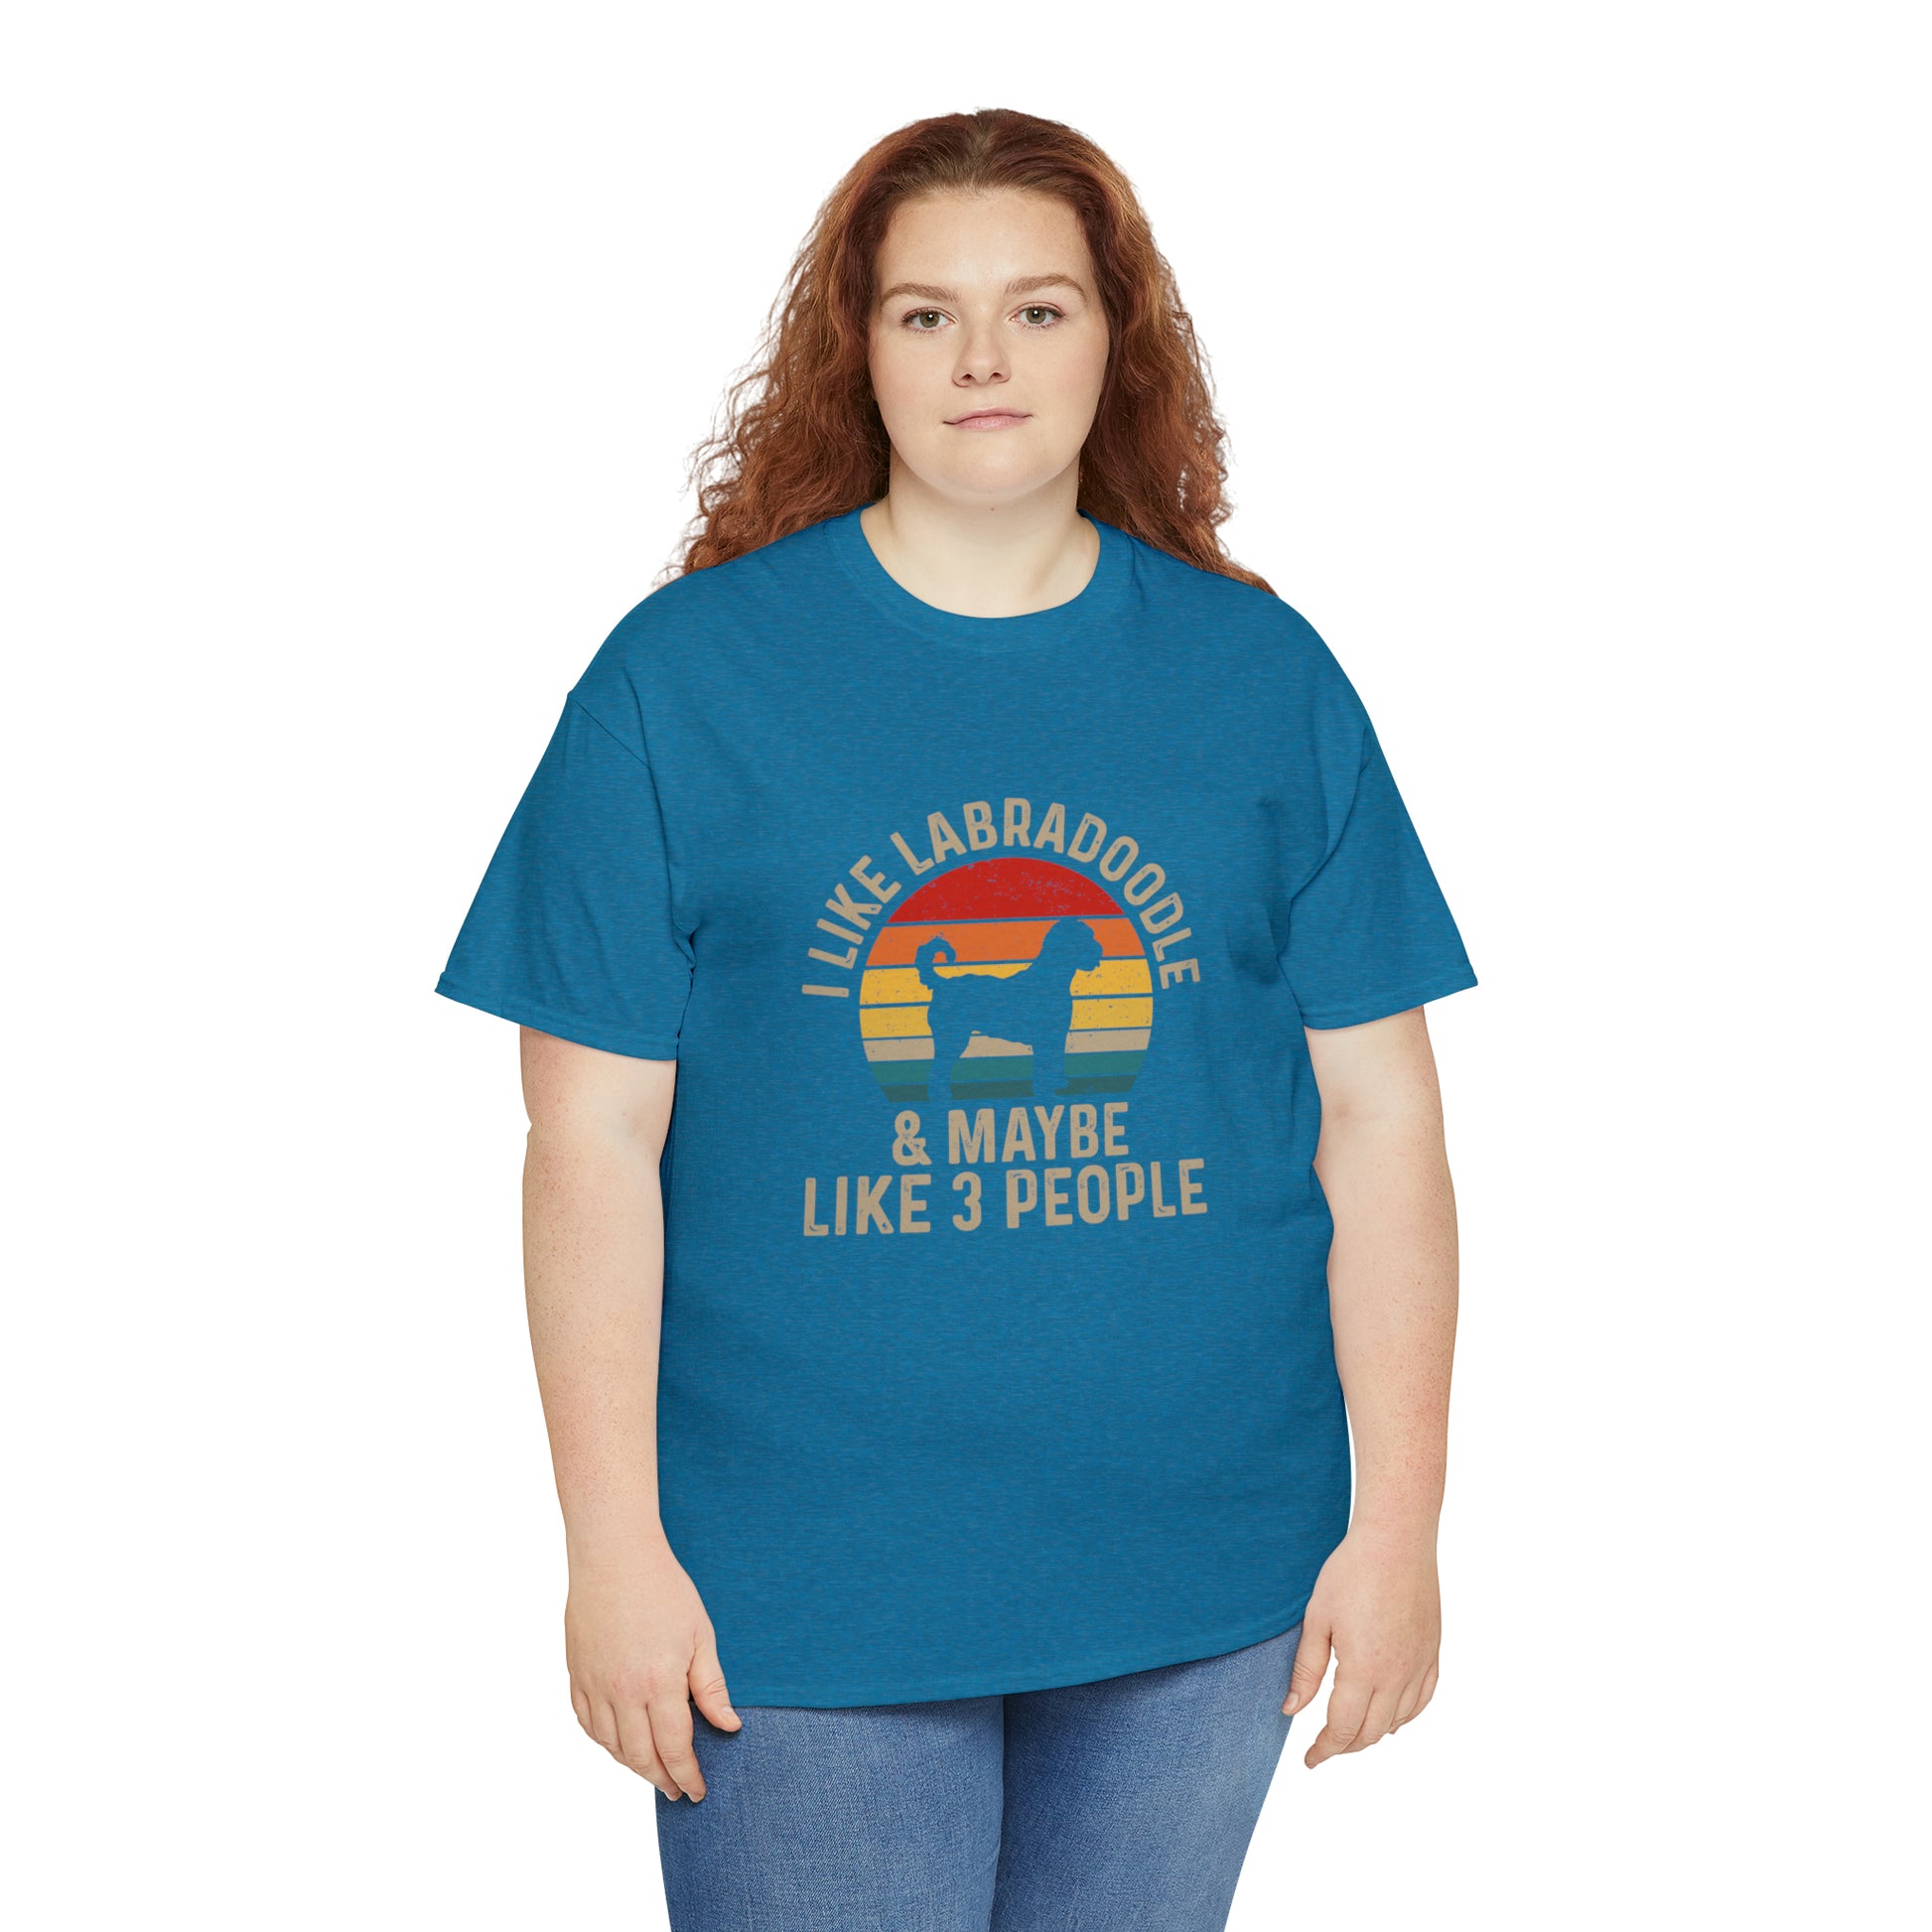 "I Like Labradoodle & Maybe Like 3 People" T-Shirt - Weave Got Gifts - Unique Gifts You Won’t Find Anywhere Else!